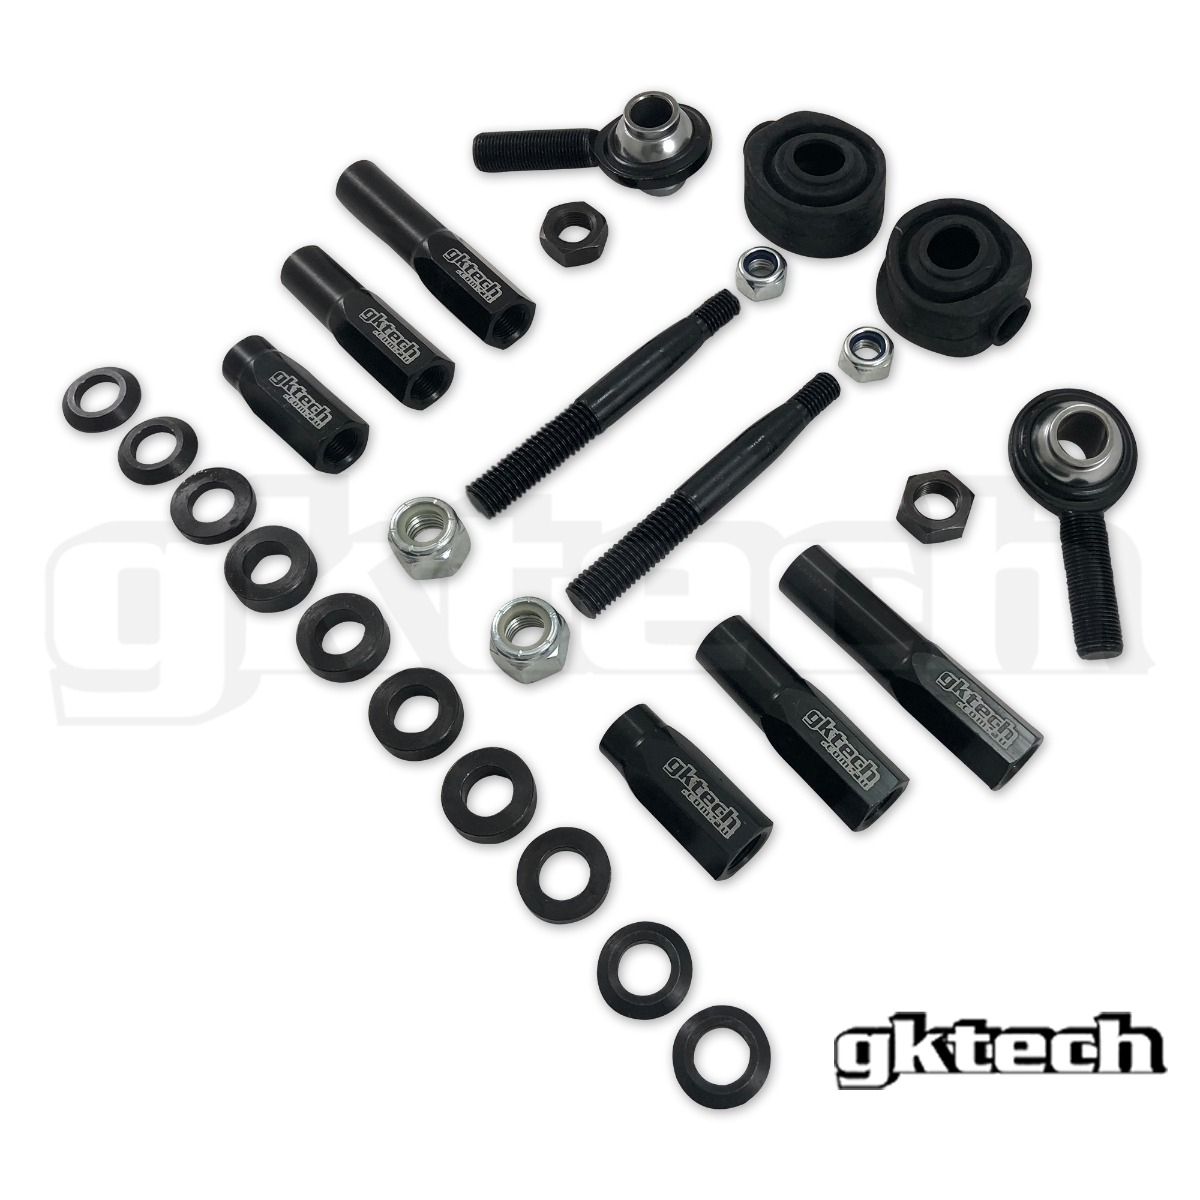 GKTech High Misalignment (64 Degrees) Outer Tie Rod Ends (12mm/14mm) - Nissan Skyline R32 R33 R34, 240SX S13 S14 S15